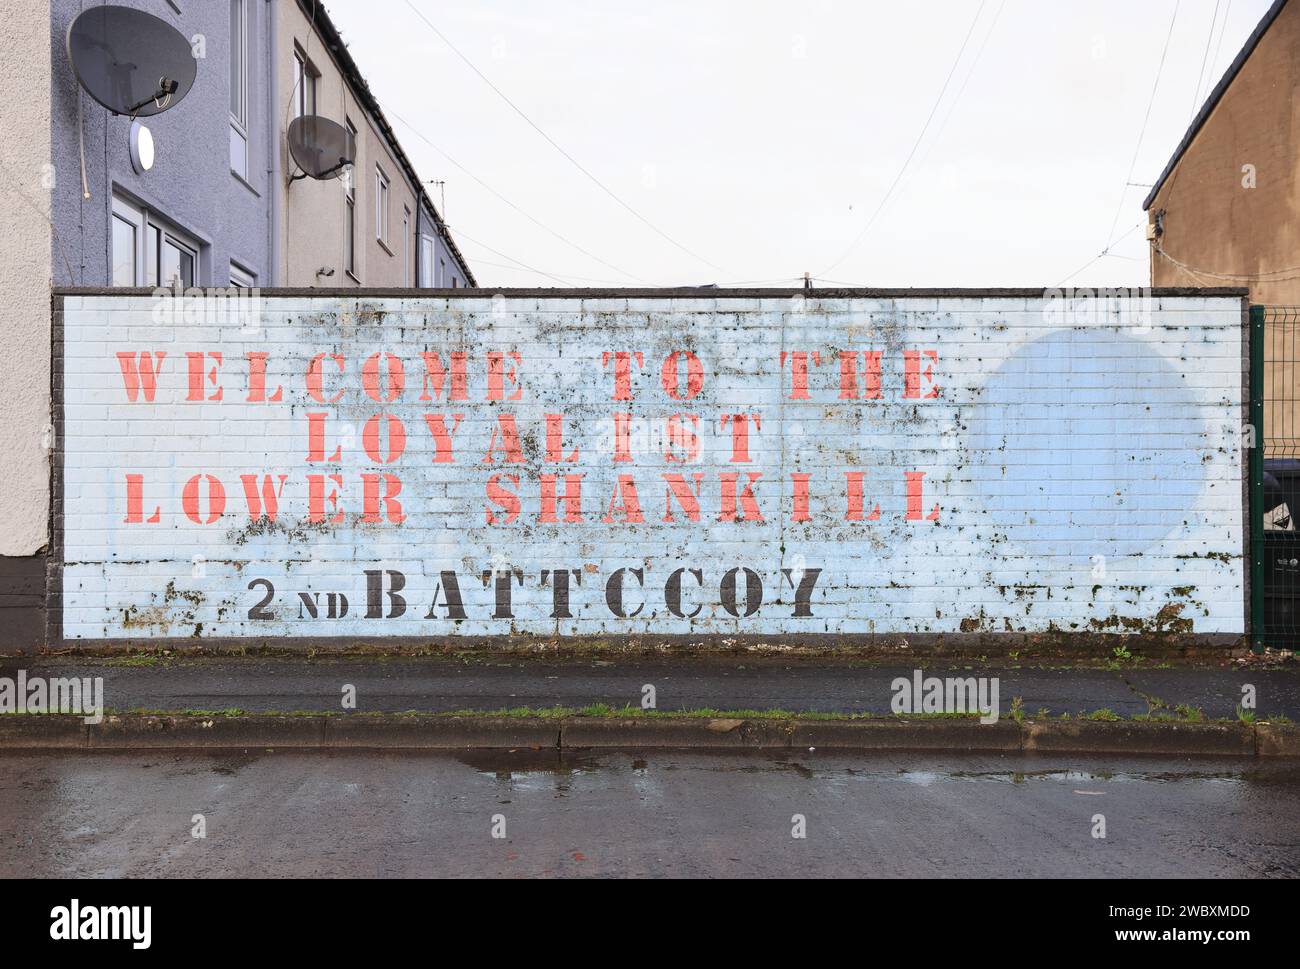 Sign for the Loyalist Lower Shankill area, in Belfast, NI, UK Stock Photo